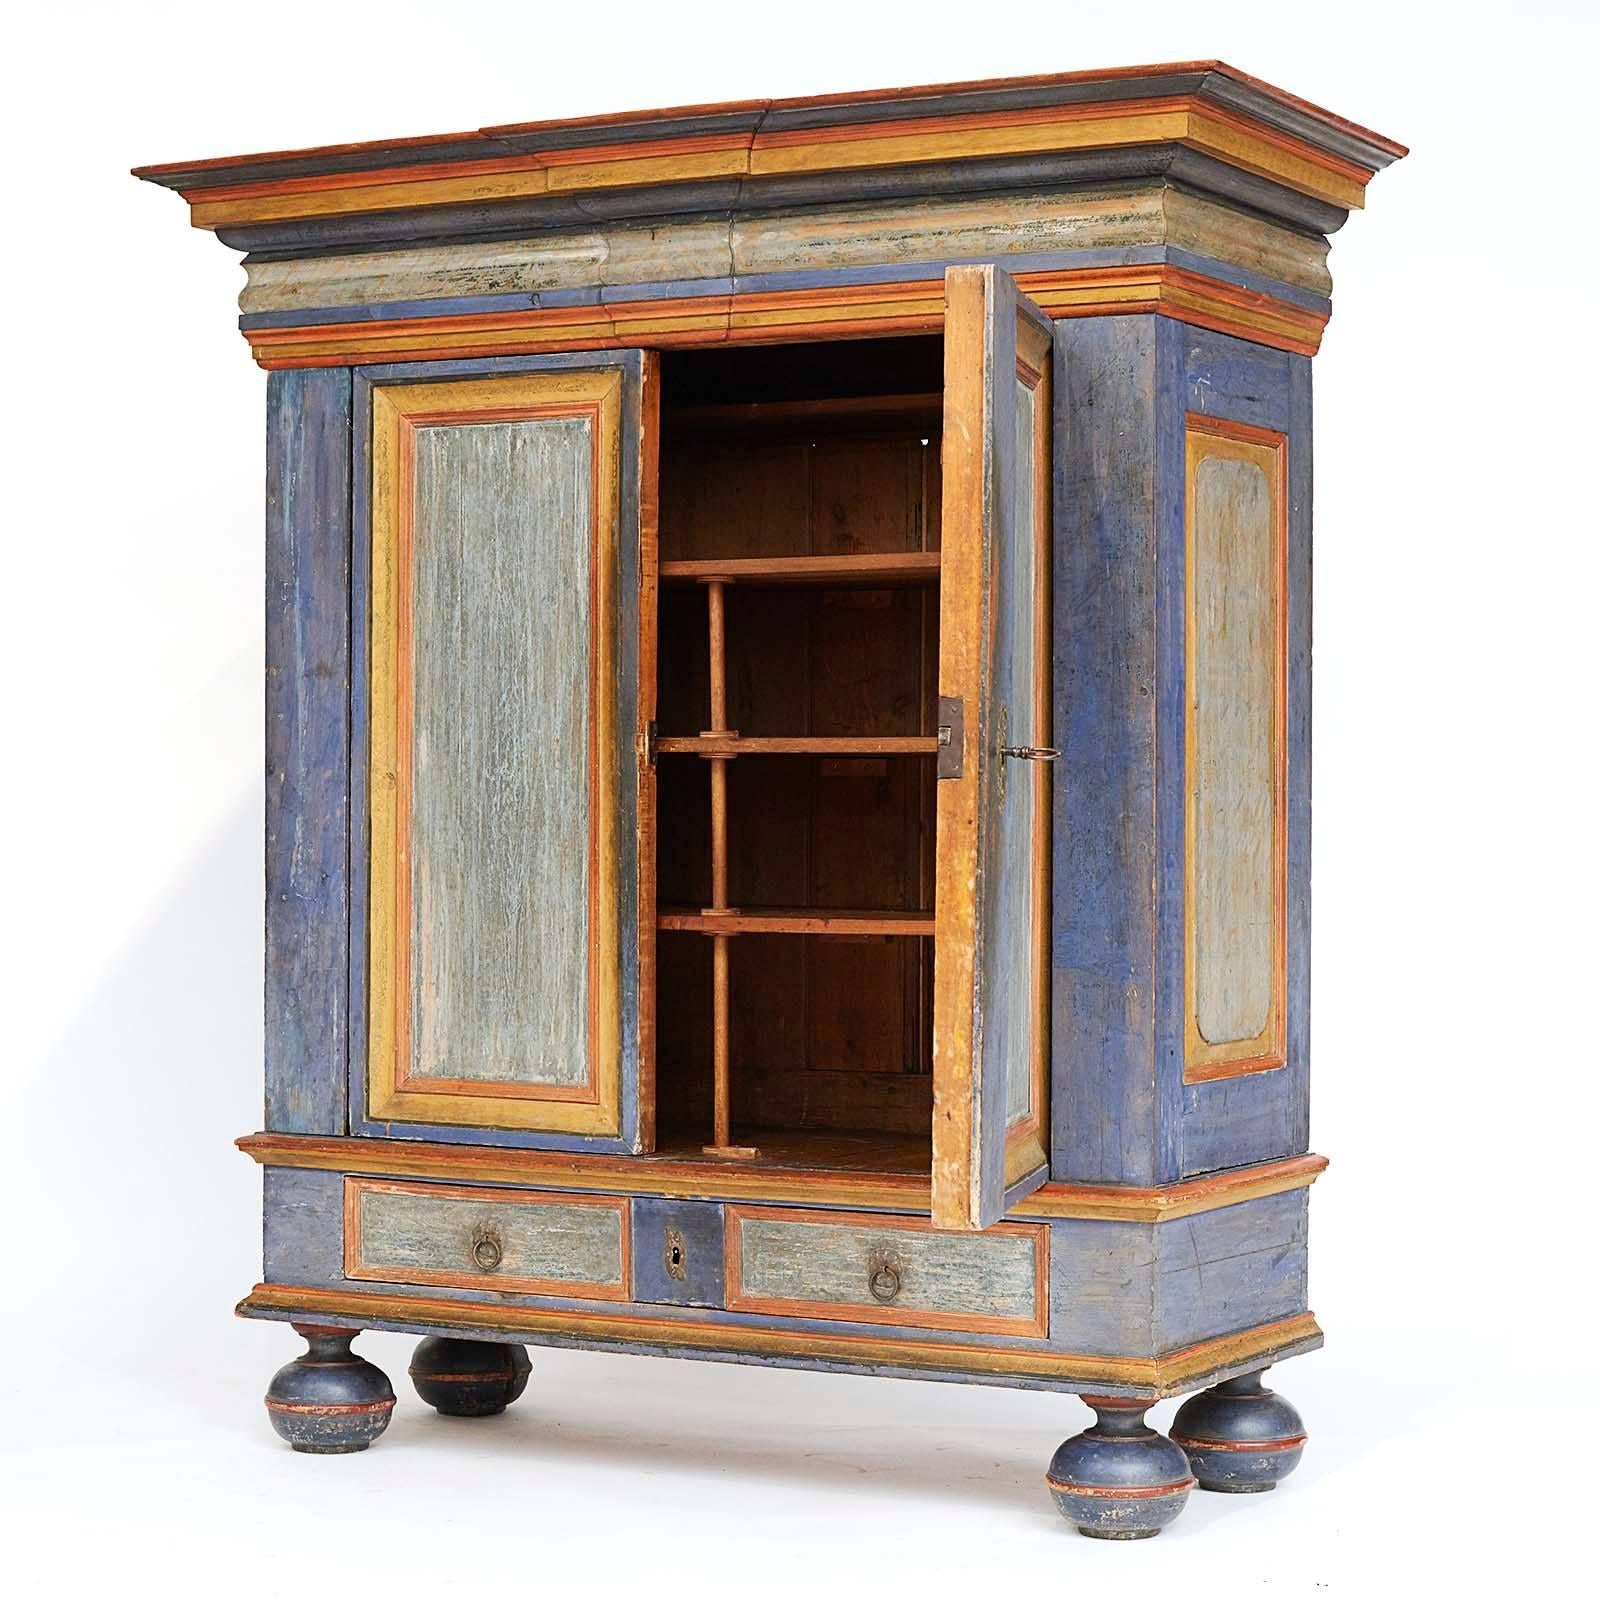 A massive Danish Baroque polychrome cabinet, mid-18th century, with an impressive overhanging stepped molded cornice, two panelled cupboard doors above one long drawers, made to look like two drawers, raised on bun feet.
Original paint surface.